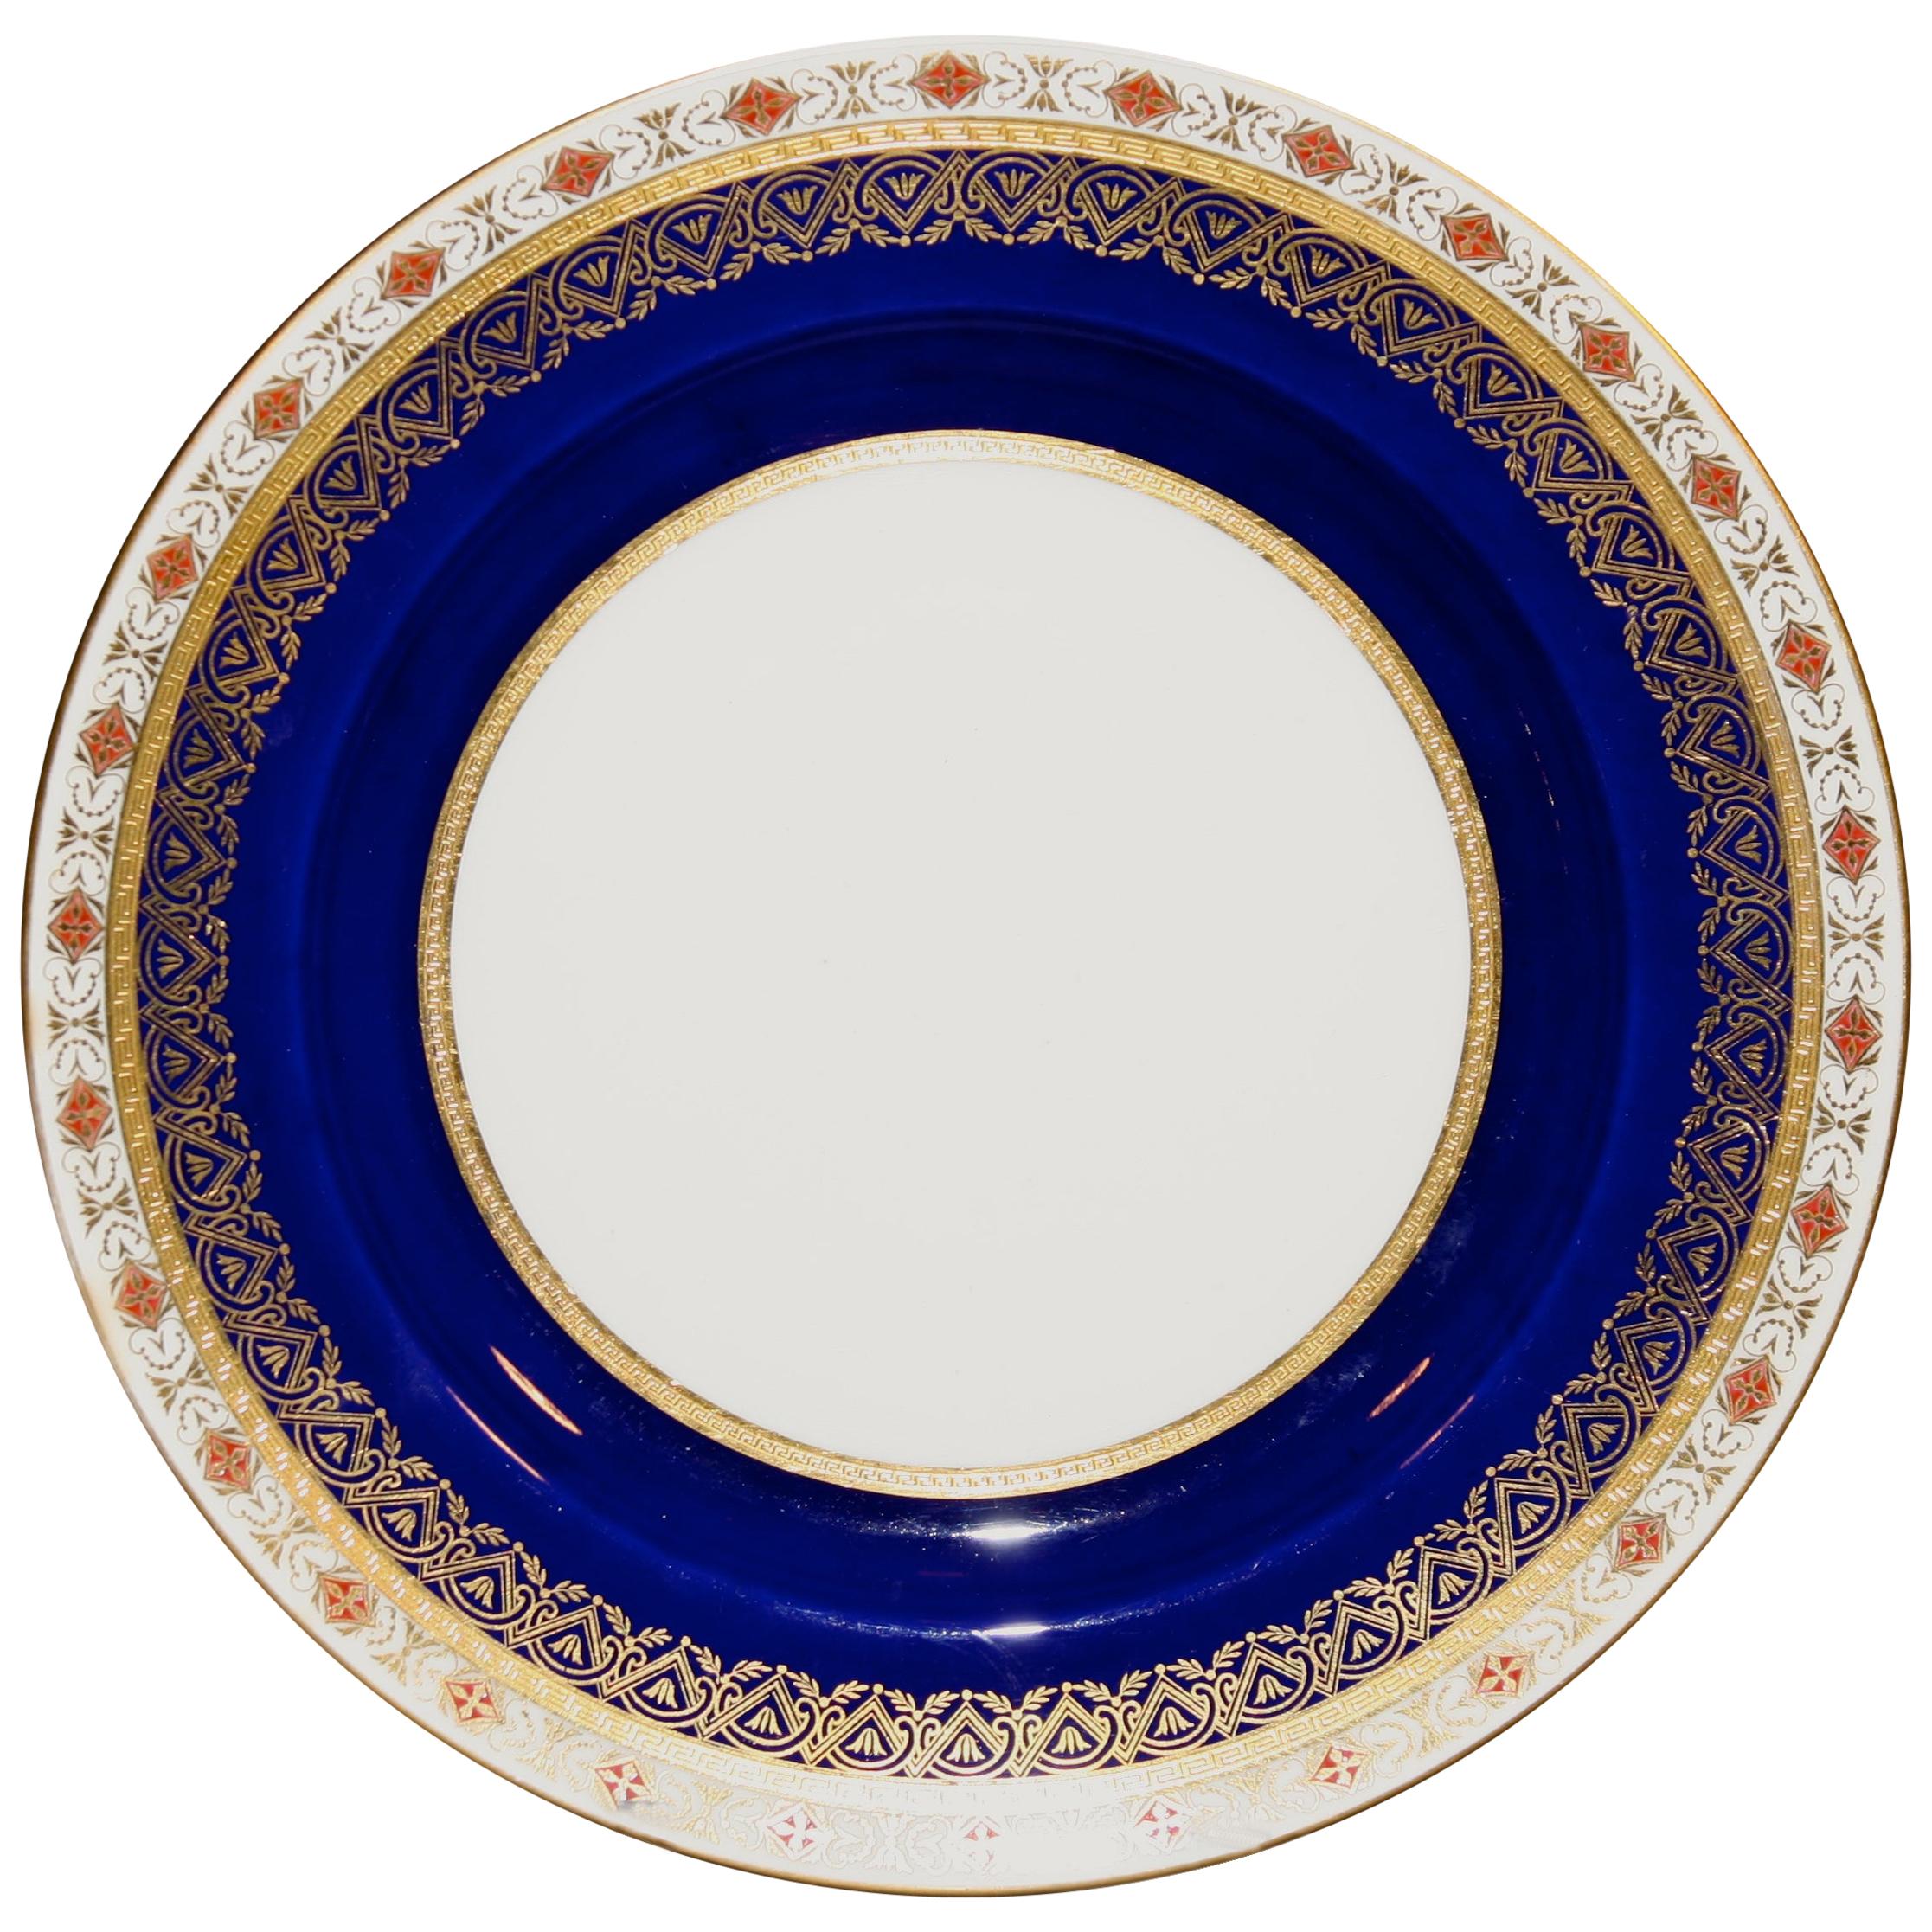 11 19th Century Minton Cobalt and Rust Service Plates For Sale